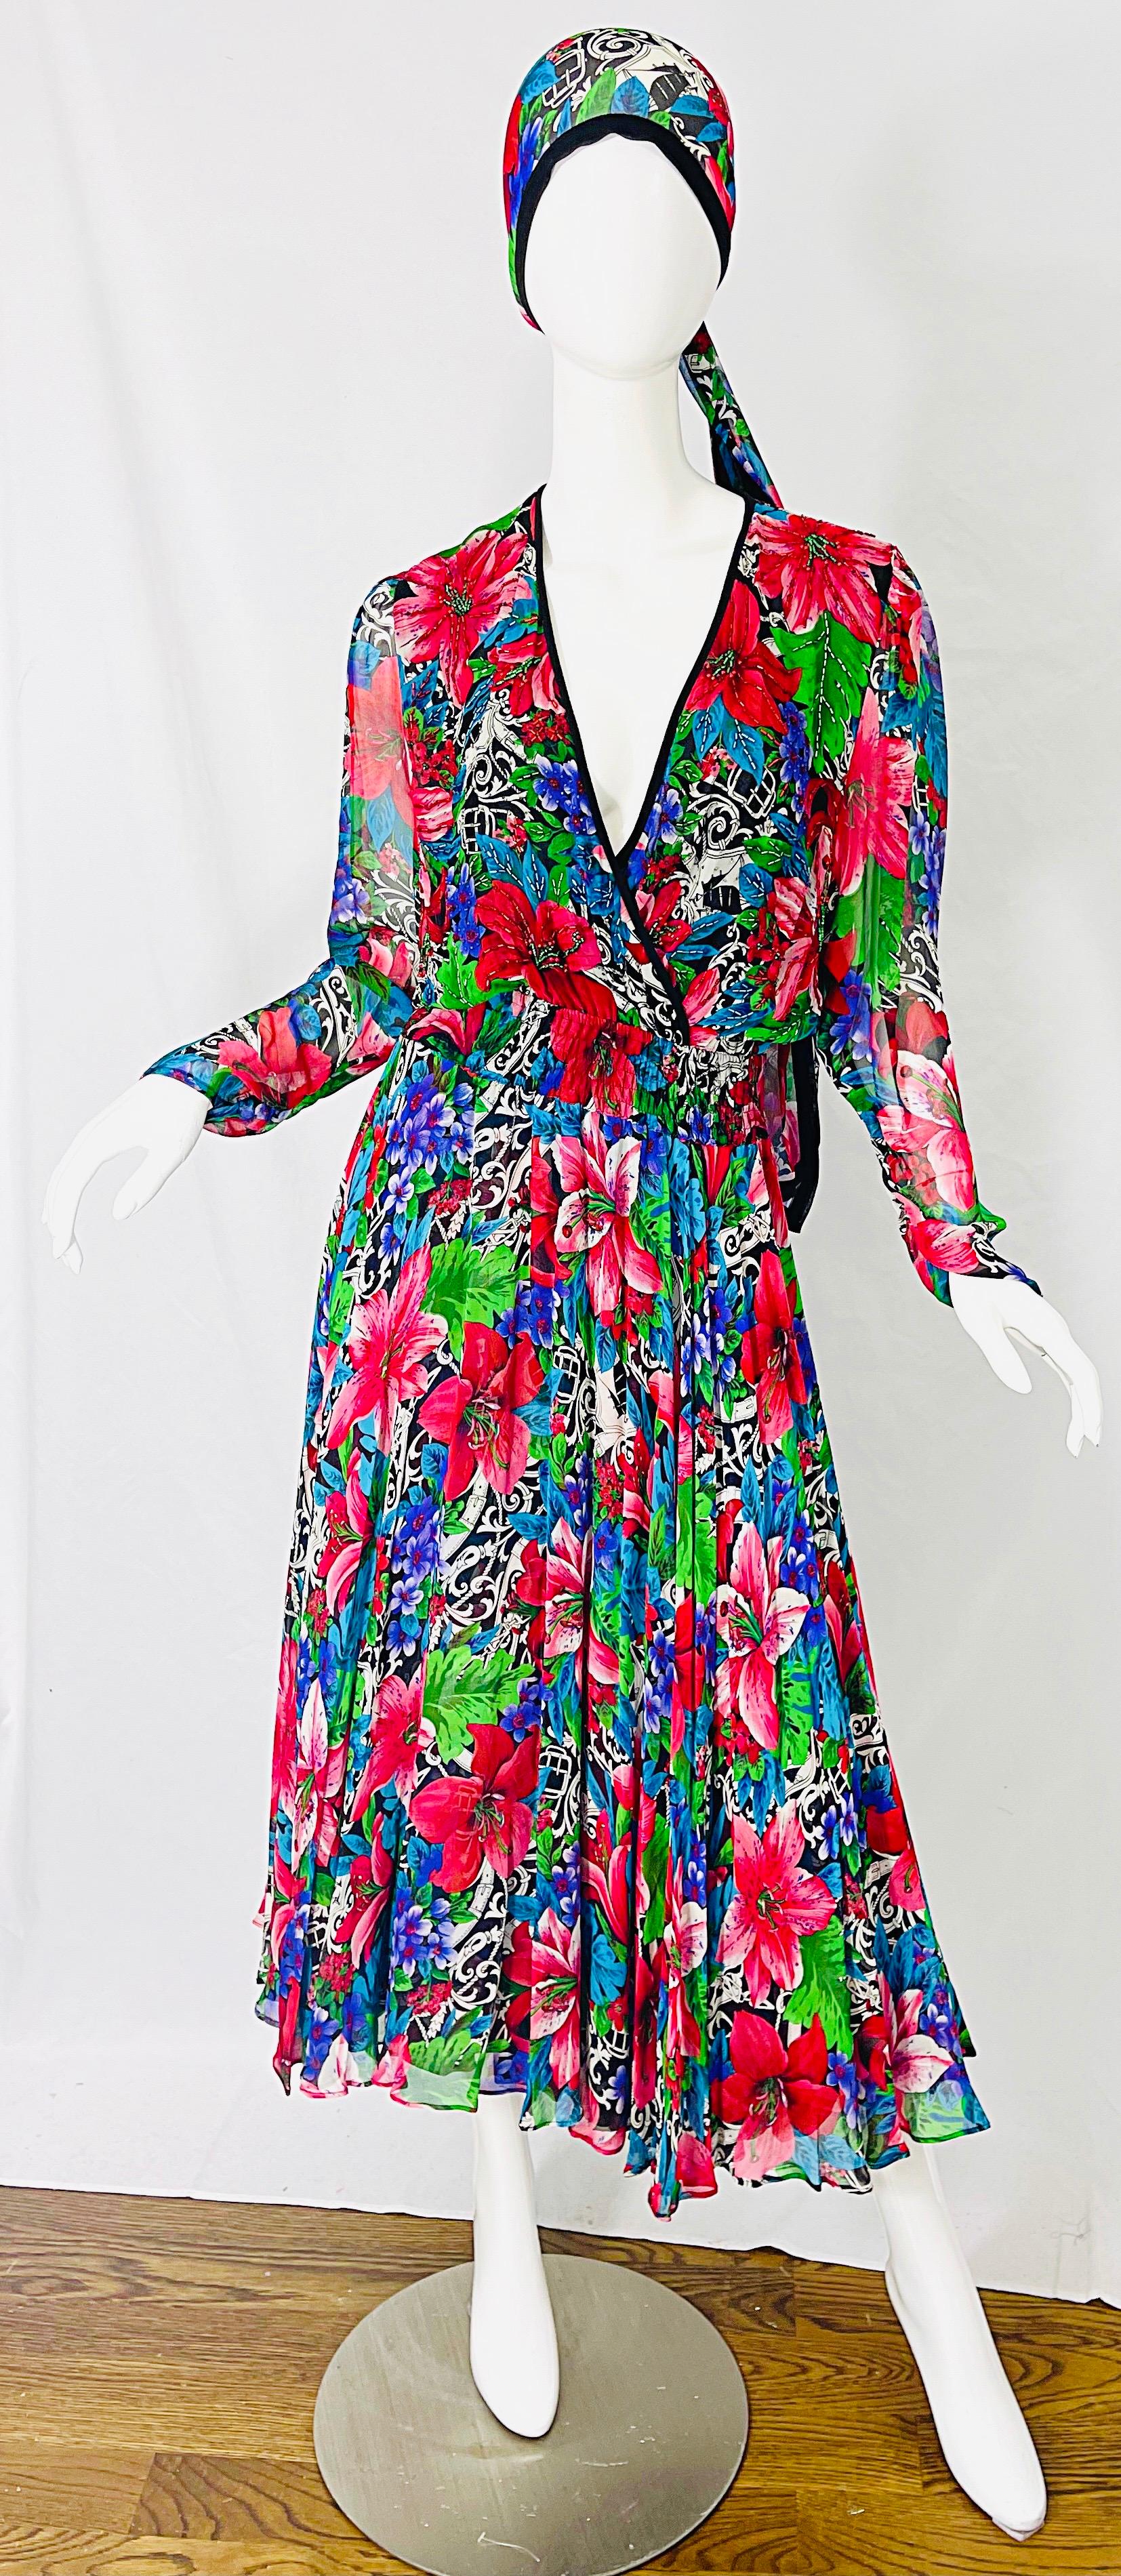 Amazing DIANE FREIS brightly colored tropical print beaded silk chiffon midi dress and sash ! Vibrant colors of green, blue, purple, red, black and white throughout. V-neck bodice with hundreds of hand-sewn beads. Flowy skirt looks fantastic with